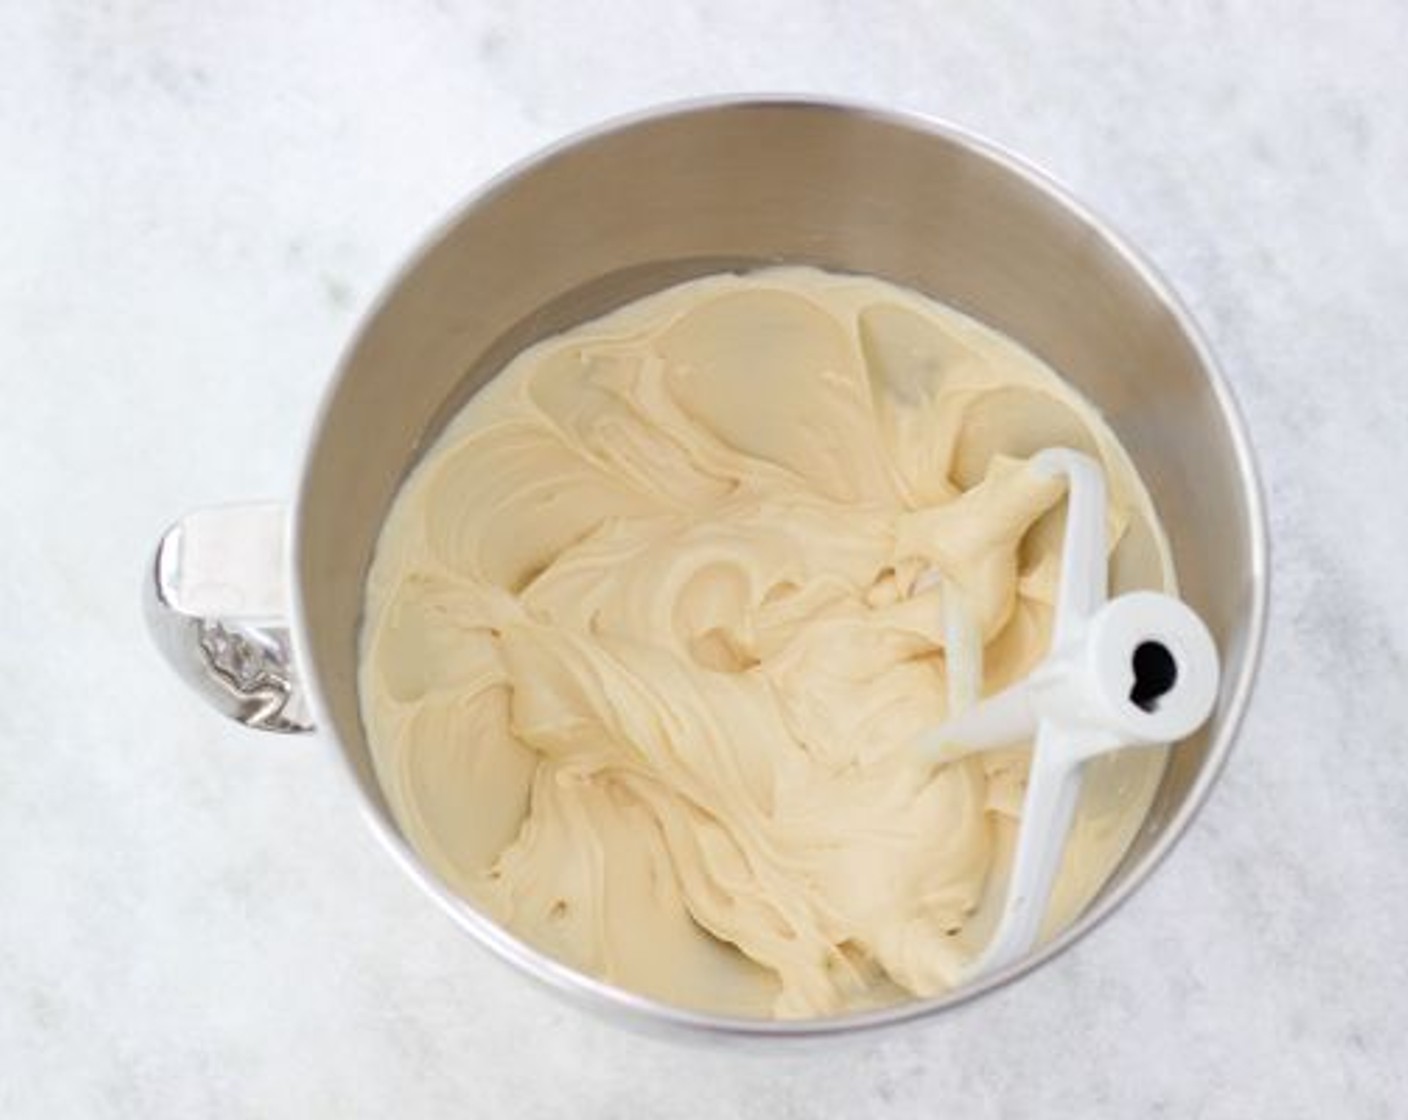 step 8 Meanwhile, make the frosting. With a paddle attachment on a standing mixer or using a hand mixer, mix the Philadelphia Original Soft Cheese (1 cup) until it has a creamy and even consistency.